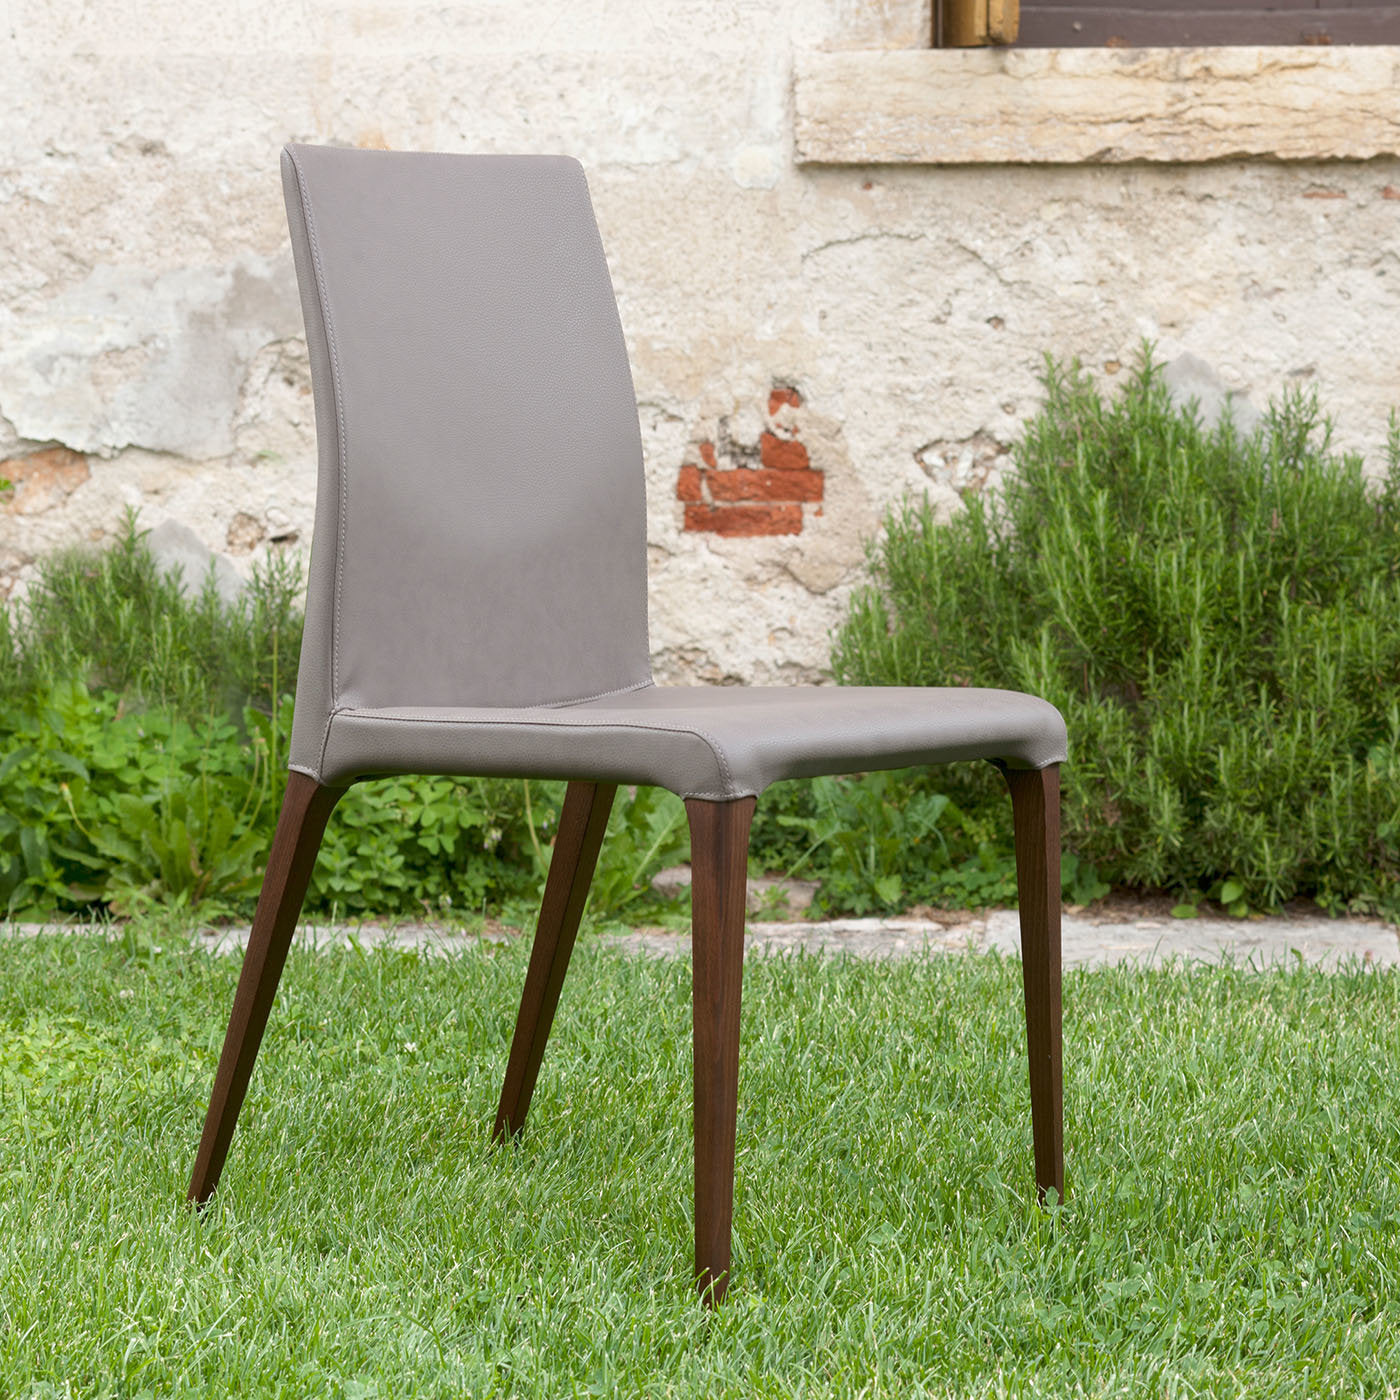 Marostica Clay Leather Chair - Alternative view 1